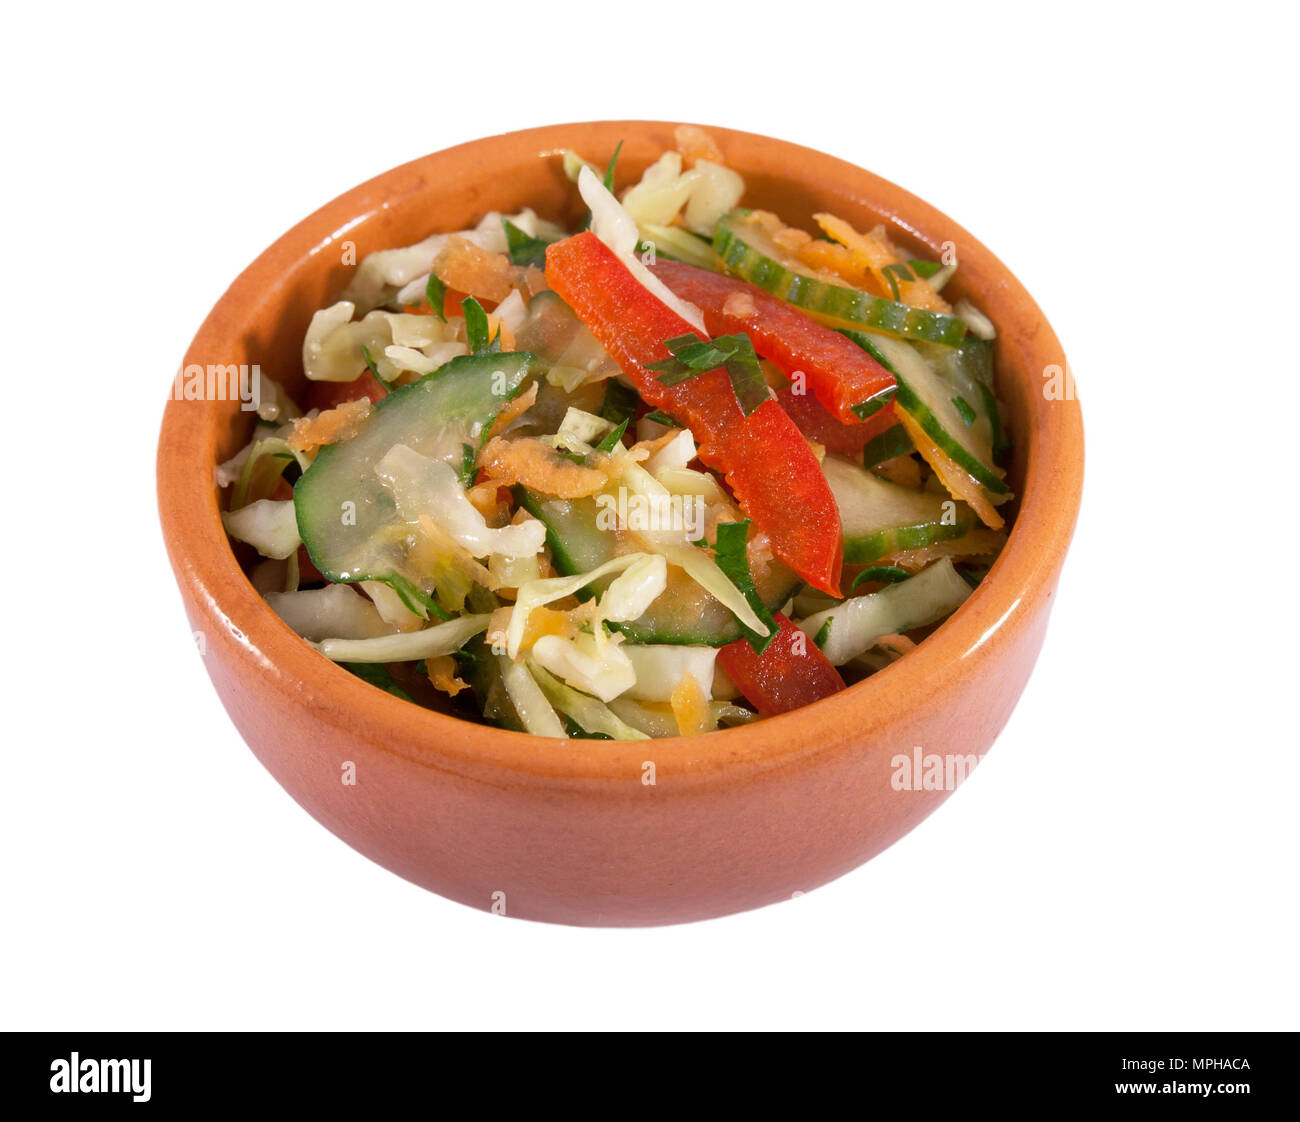 Salad with red sweet pepper, cabbage, cucumber, carrot oil and lemon juice Stock Photo